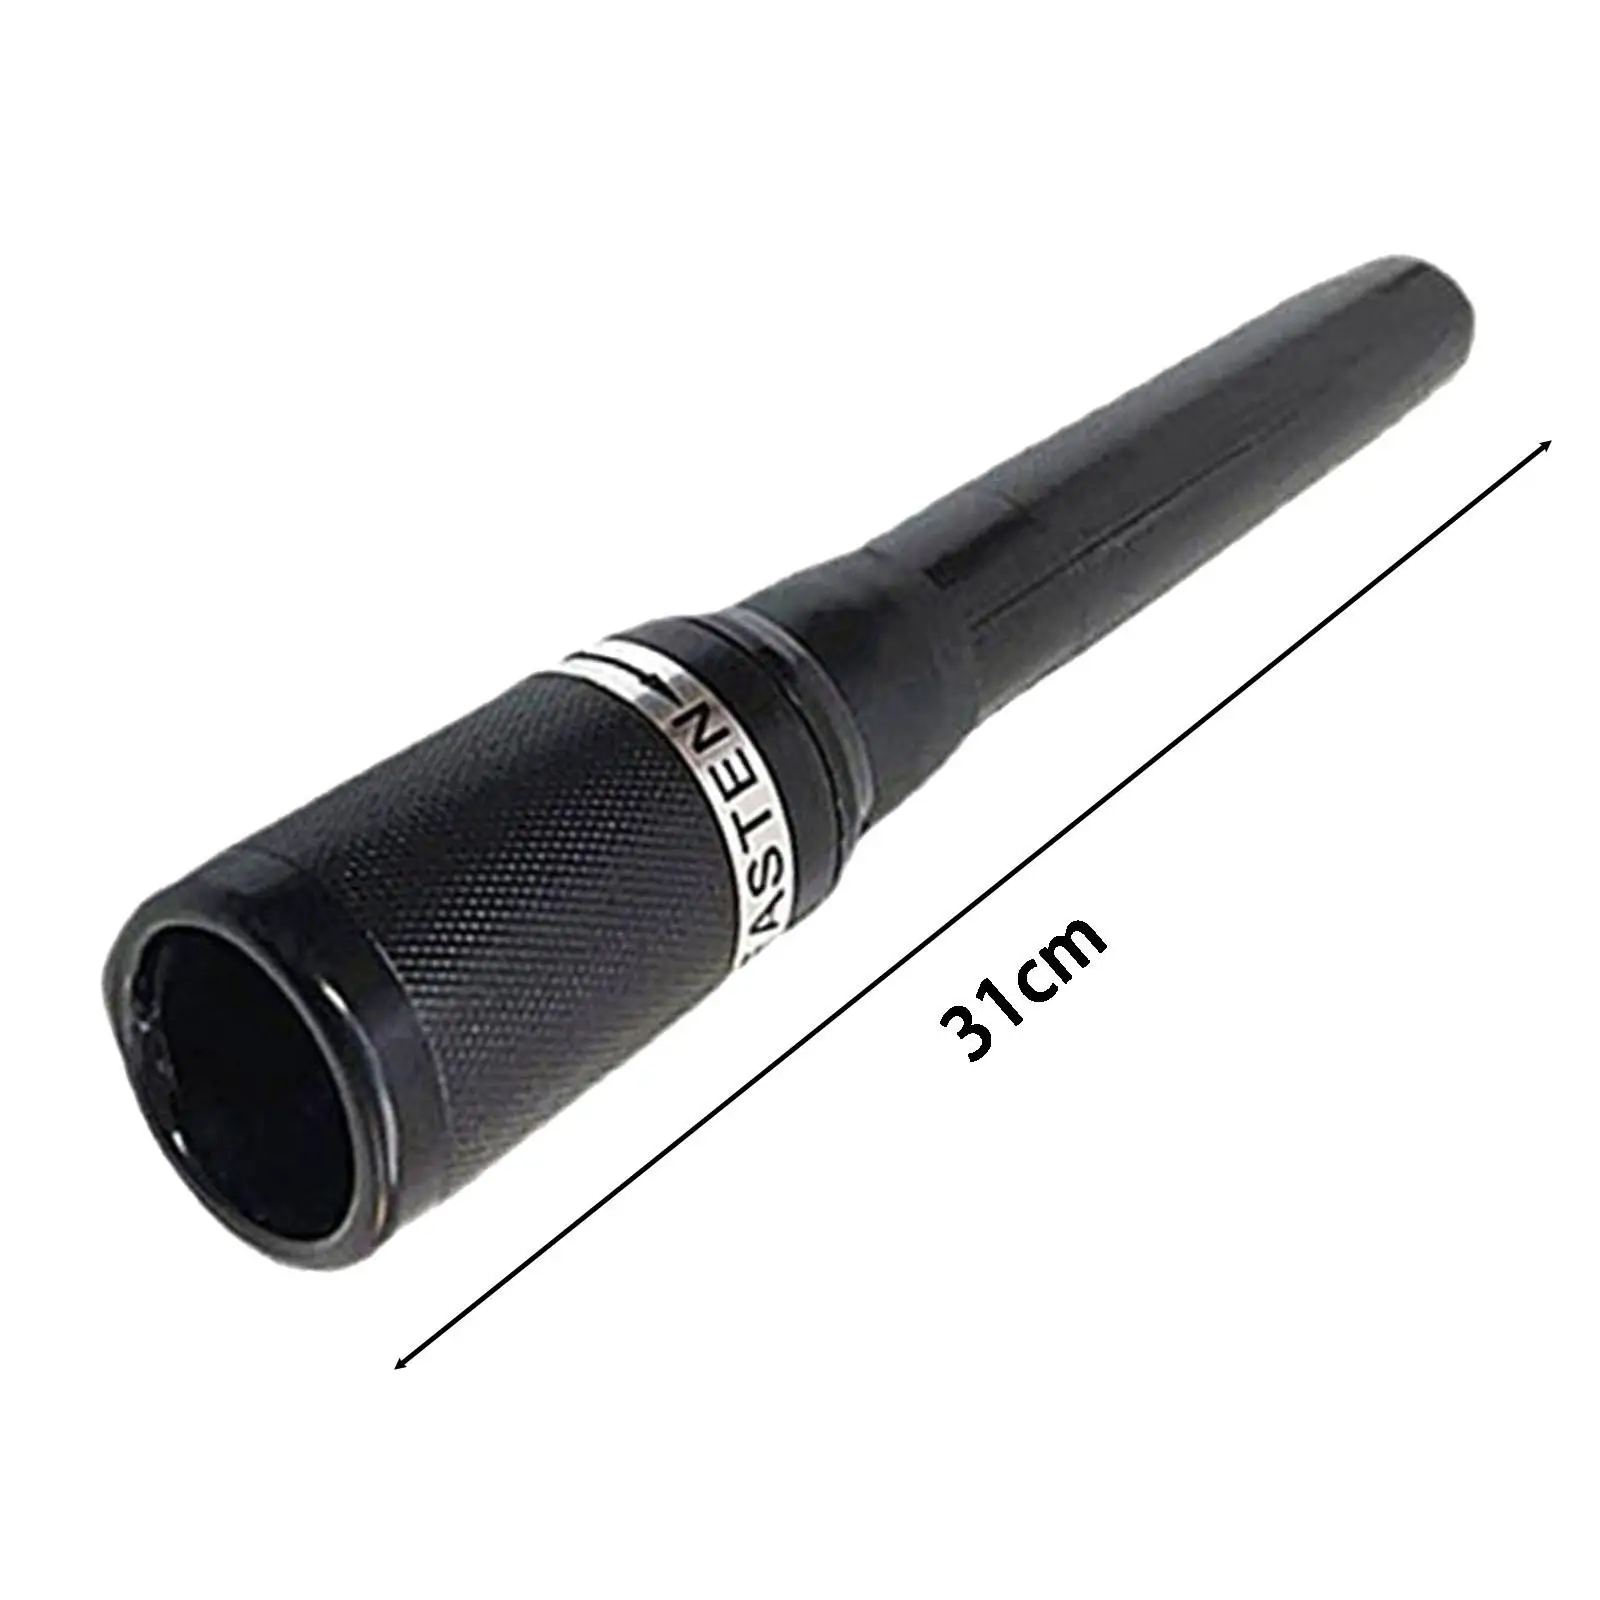 Billiard Pool Stick Extension,Cue Extender Shaft Sleeve Accessory,Snooker End Lengthener Billiards Push on Pool Cue Extension